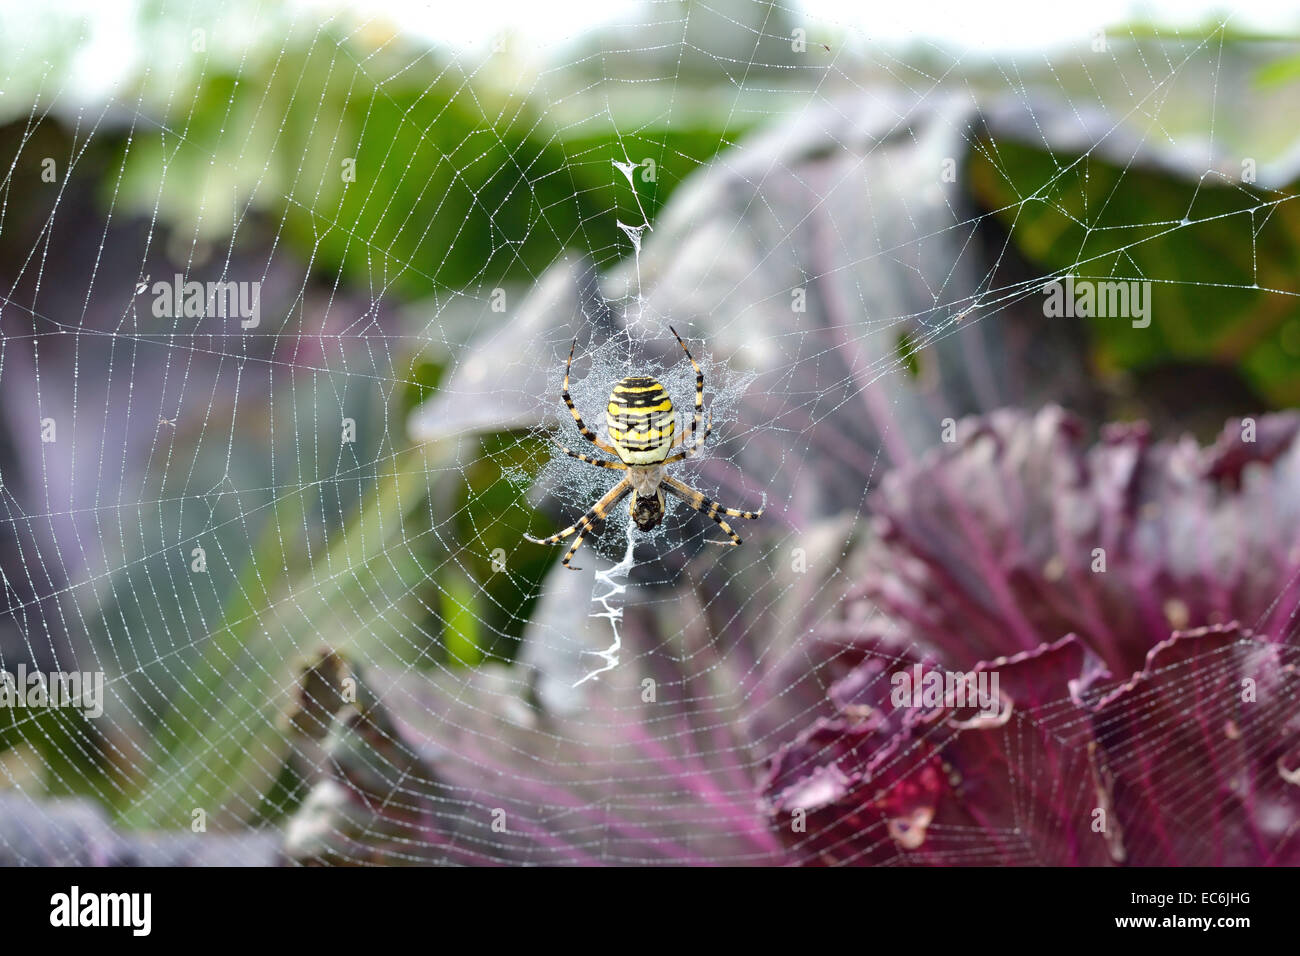 Wasp spider with her amp 8203 amp 8203 web Stock Photo